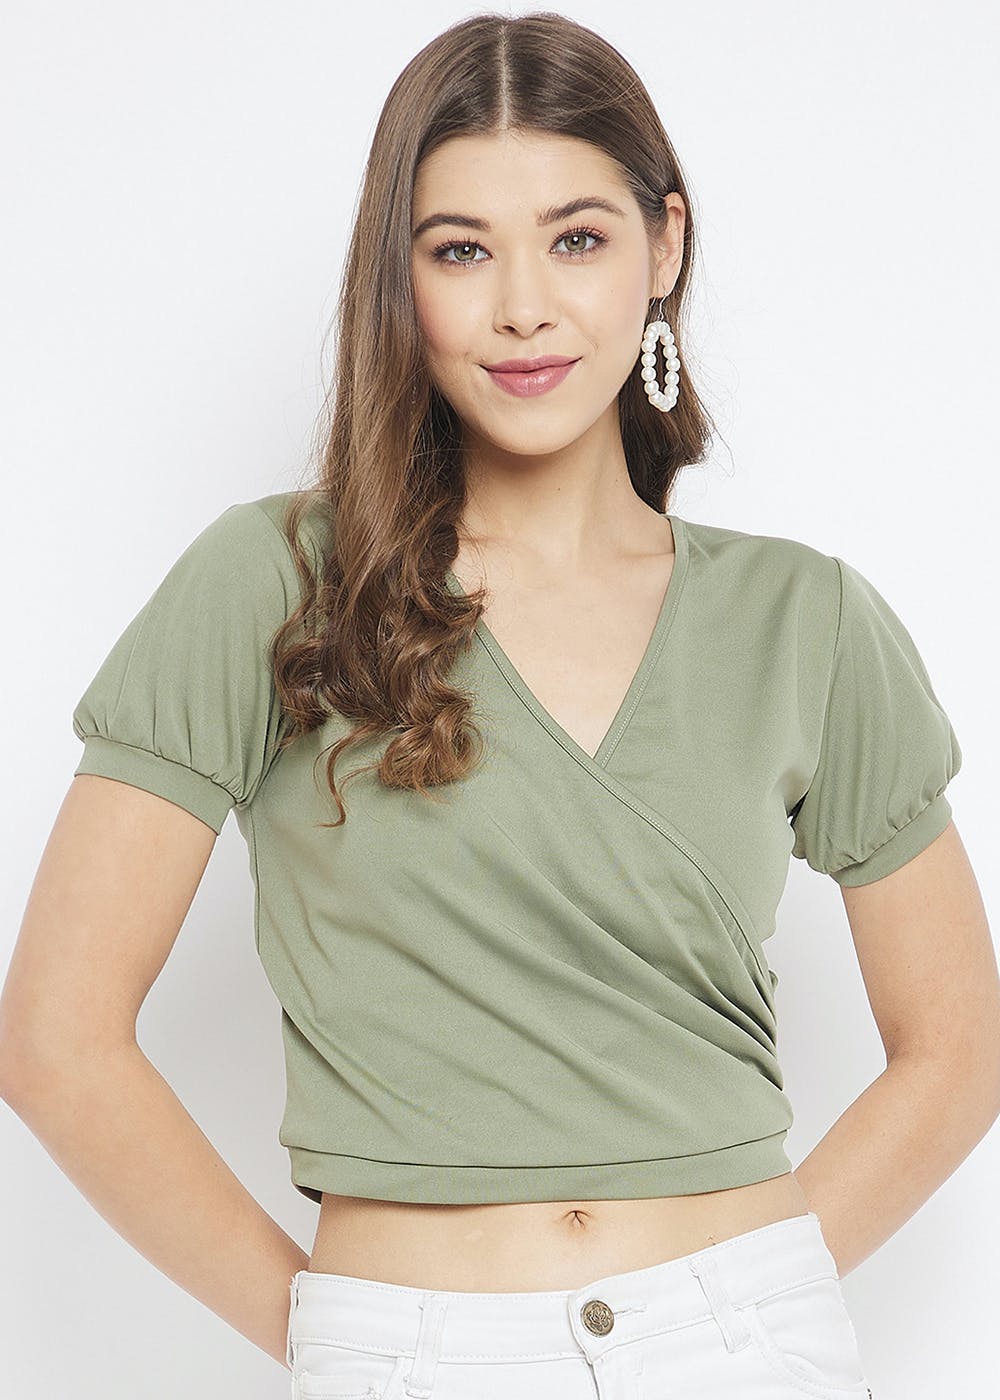 Total 53+ imagen army green crop top outfit - Abzlocal.mx